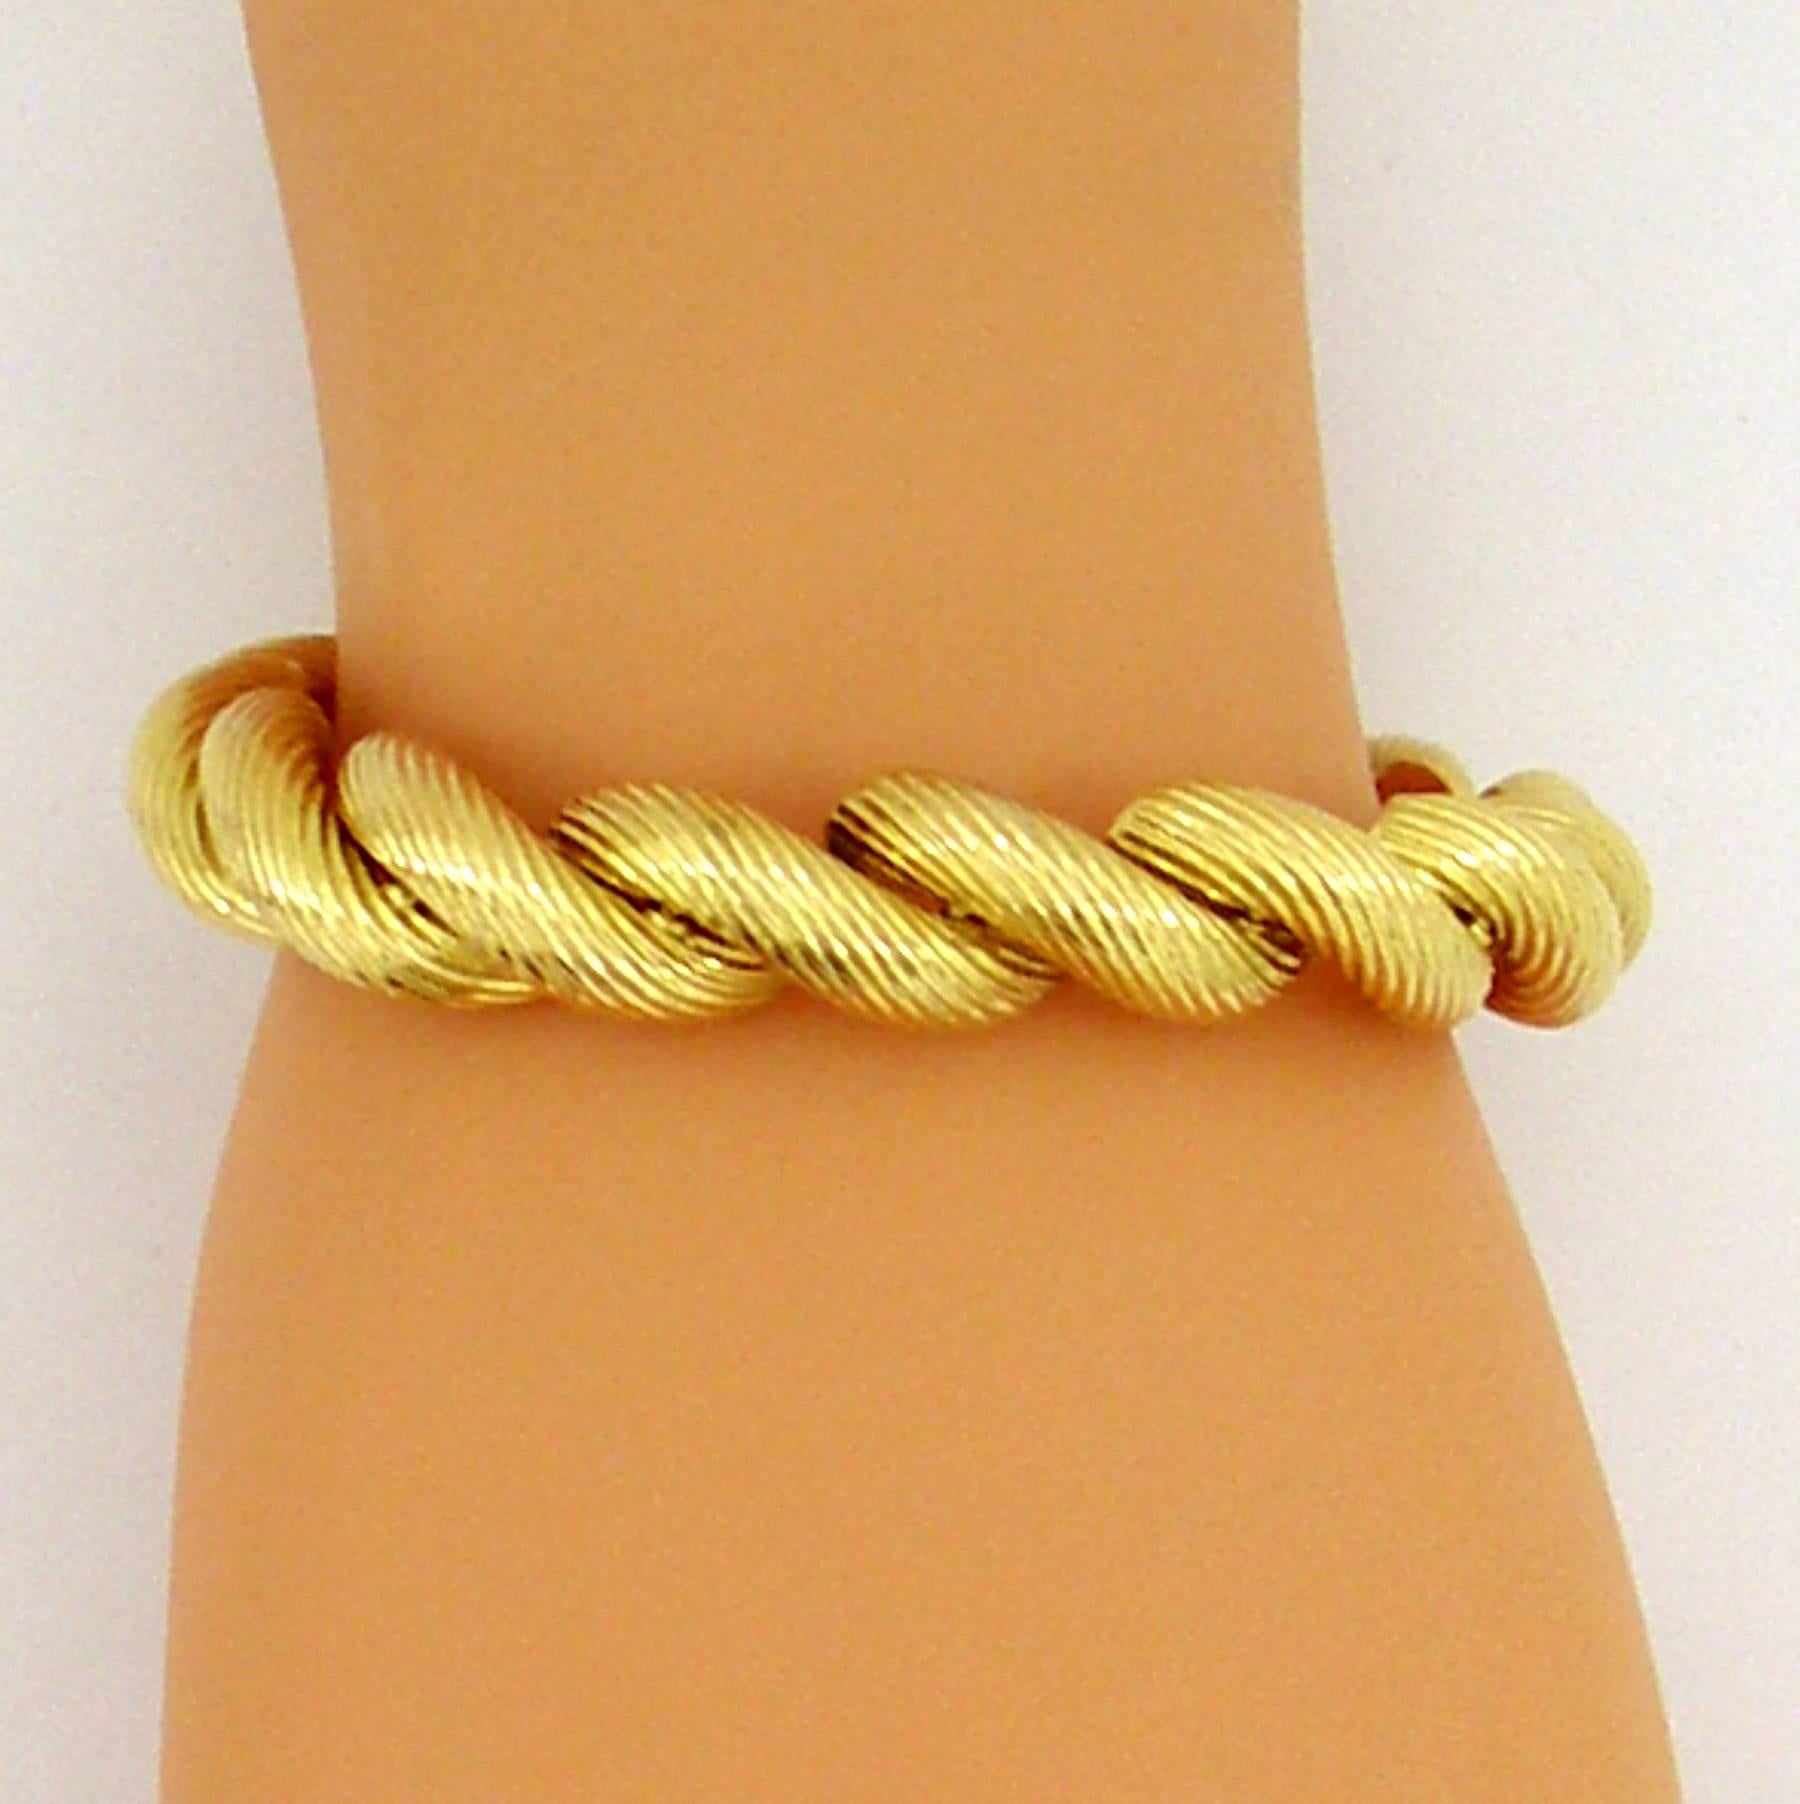 An 18K yellow gold bracelet by Tiffany and Co. comprised of 14 yellow gold links, and an additional link featuring a hidden clasp. Each link of this "macaroni" bracelet features a twisted finish. Will accommodate wrists up to 6 3/4 inches.